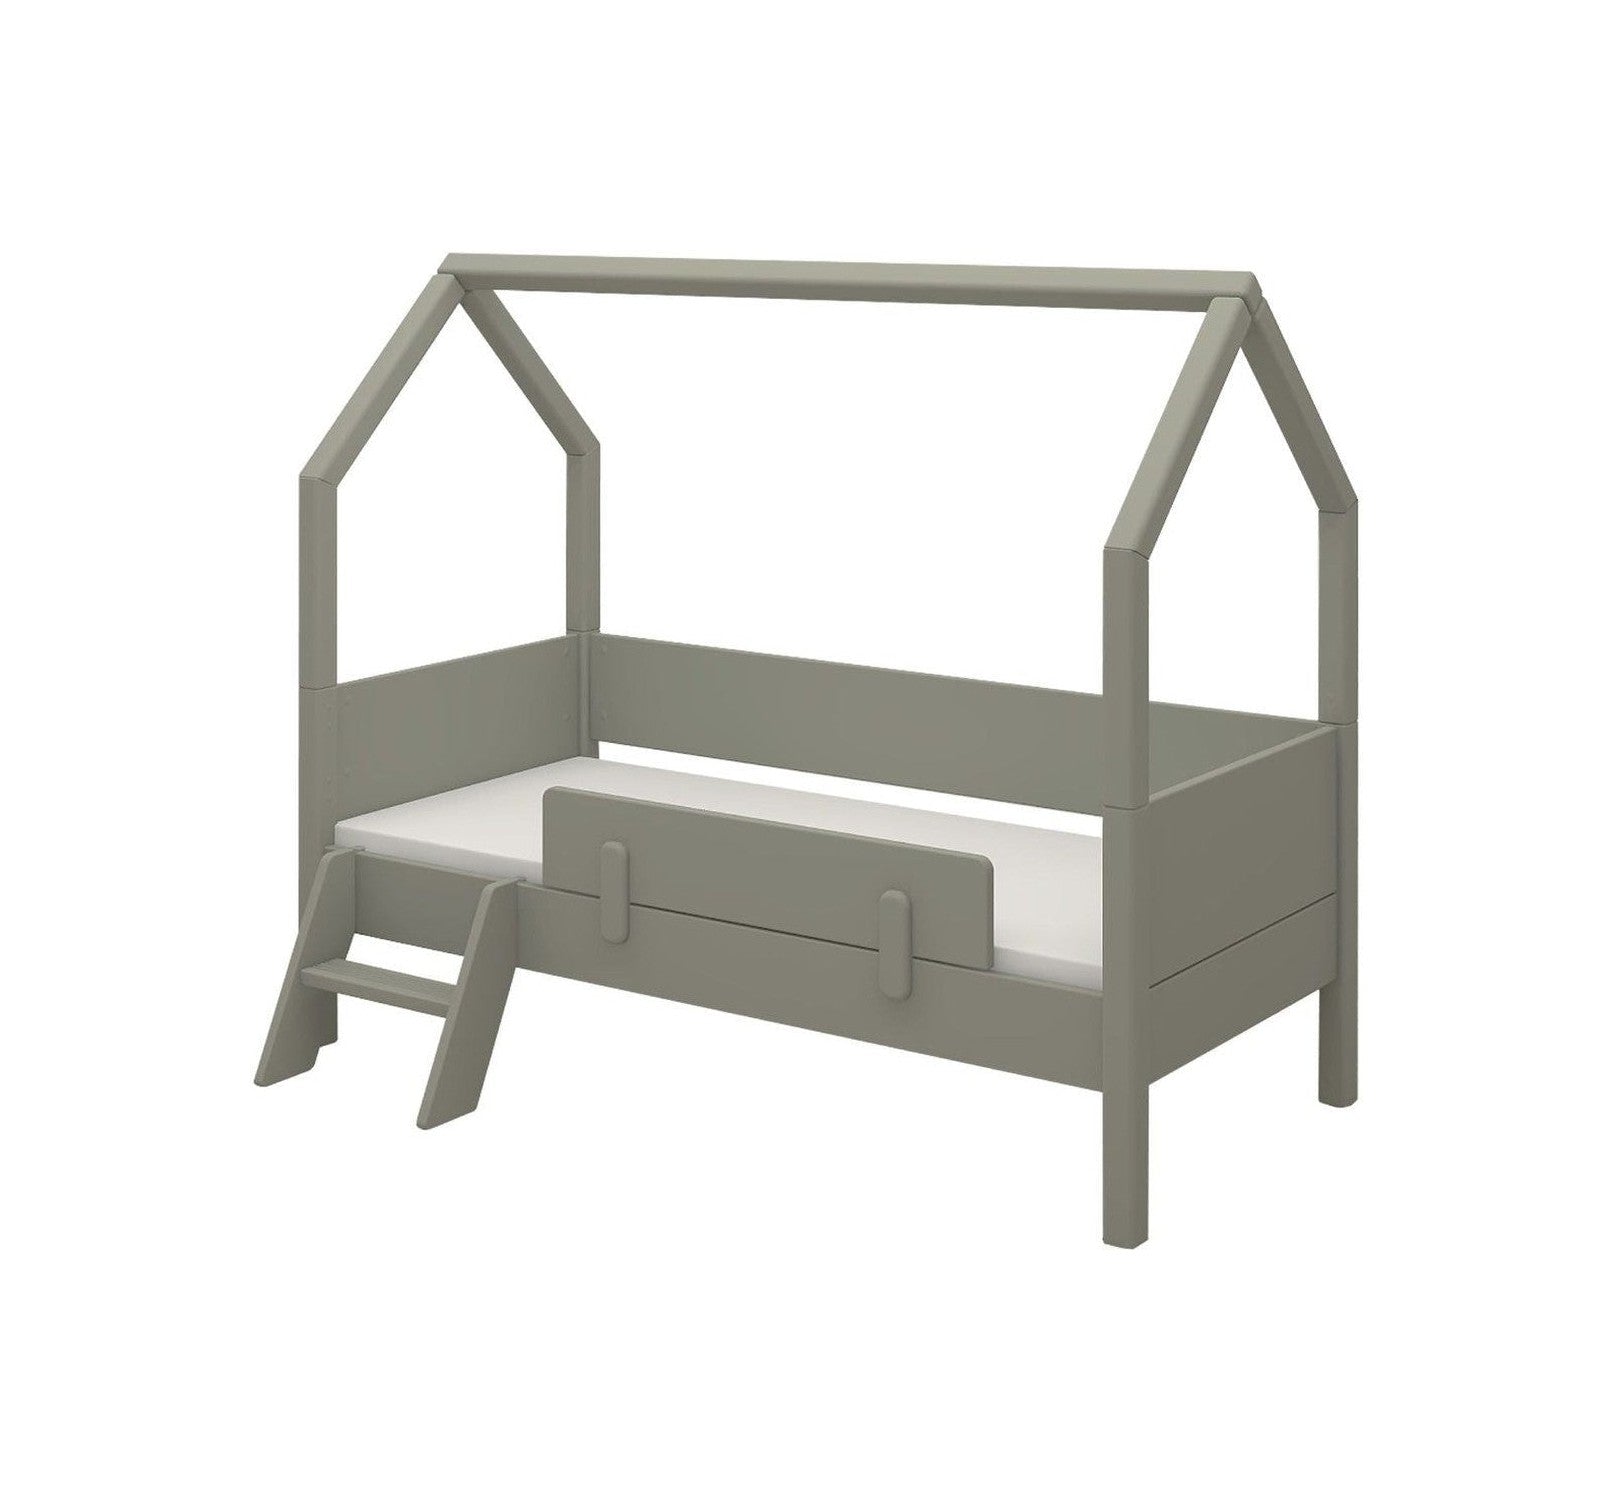 Flexa Junior Bed With House Frame, Safety Rail and Ladder